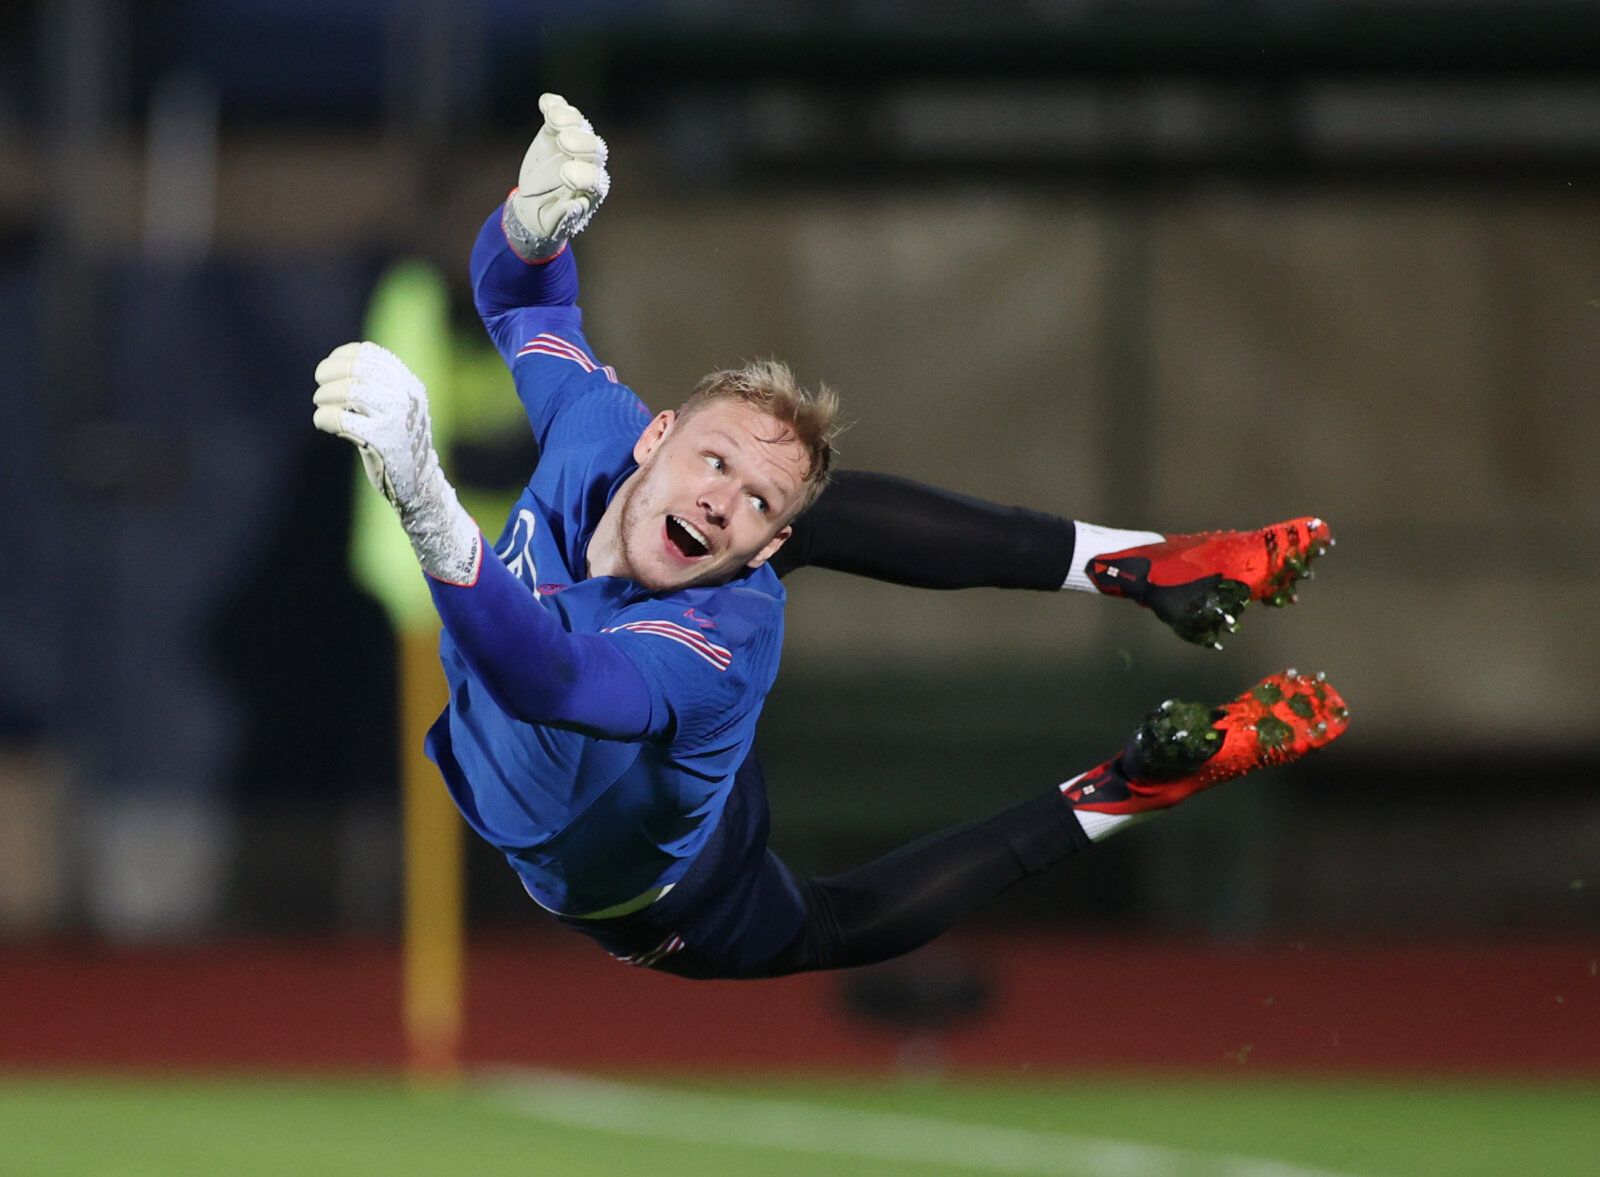 Soccer Football - World Cup - UEFA Qualifiers - Group I - San Marino v England - San Marino Stadium, Serravalle, San Marino - November 15, 2021 England's Aaron Ramsdale during the warm up before the match Action Images via Reuters/Carl Recine